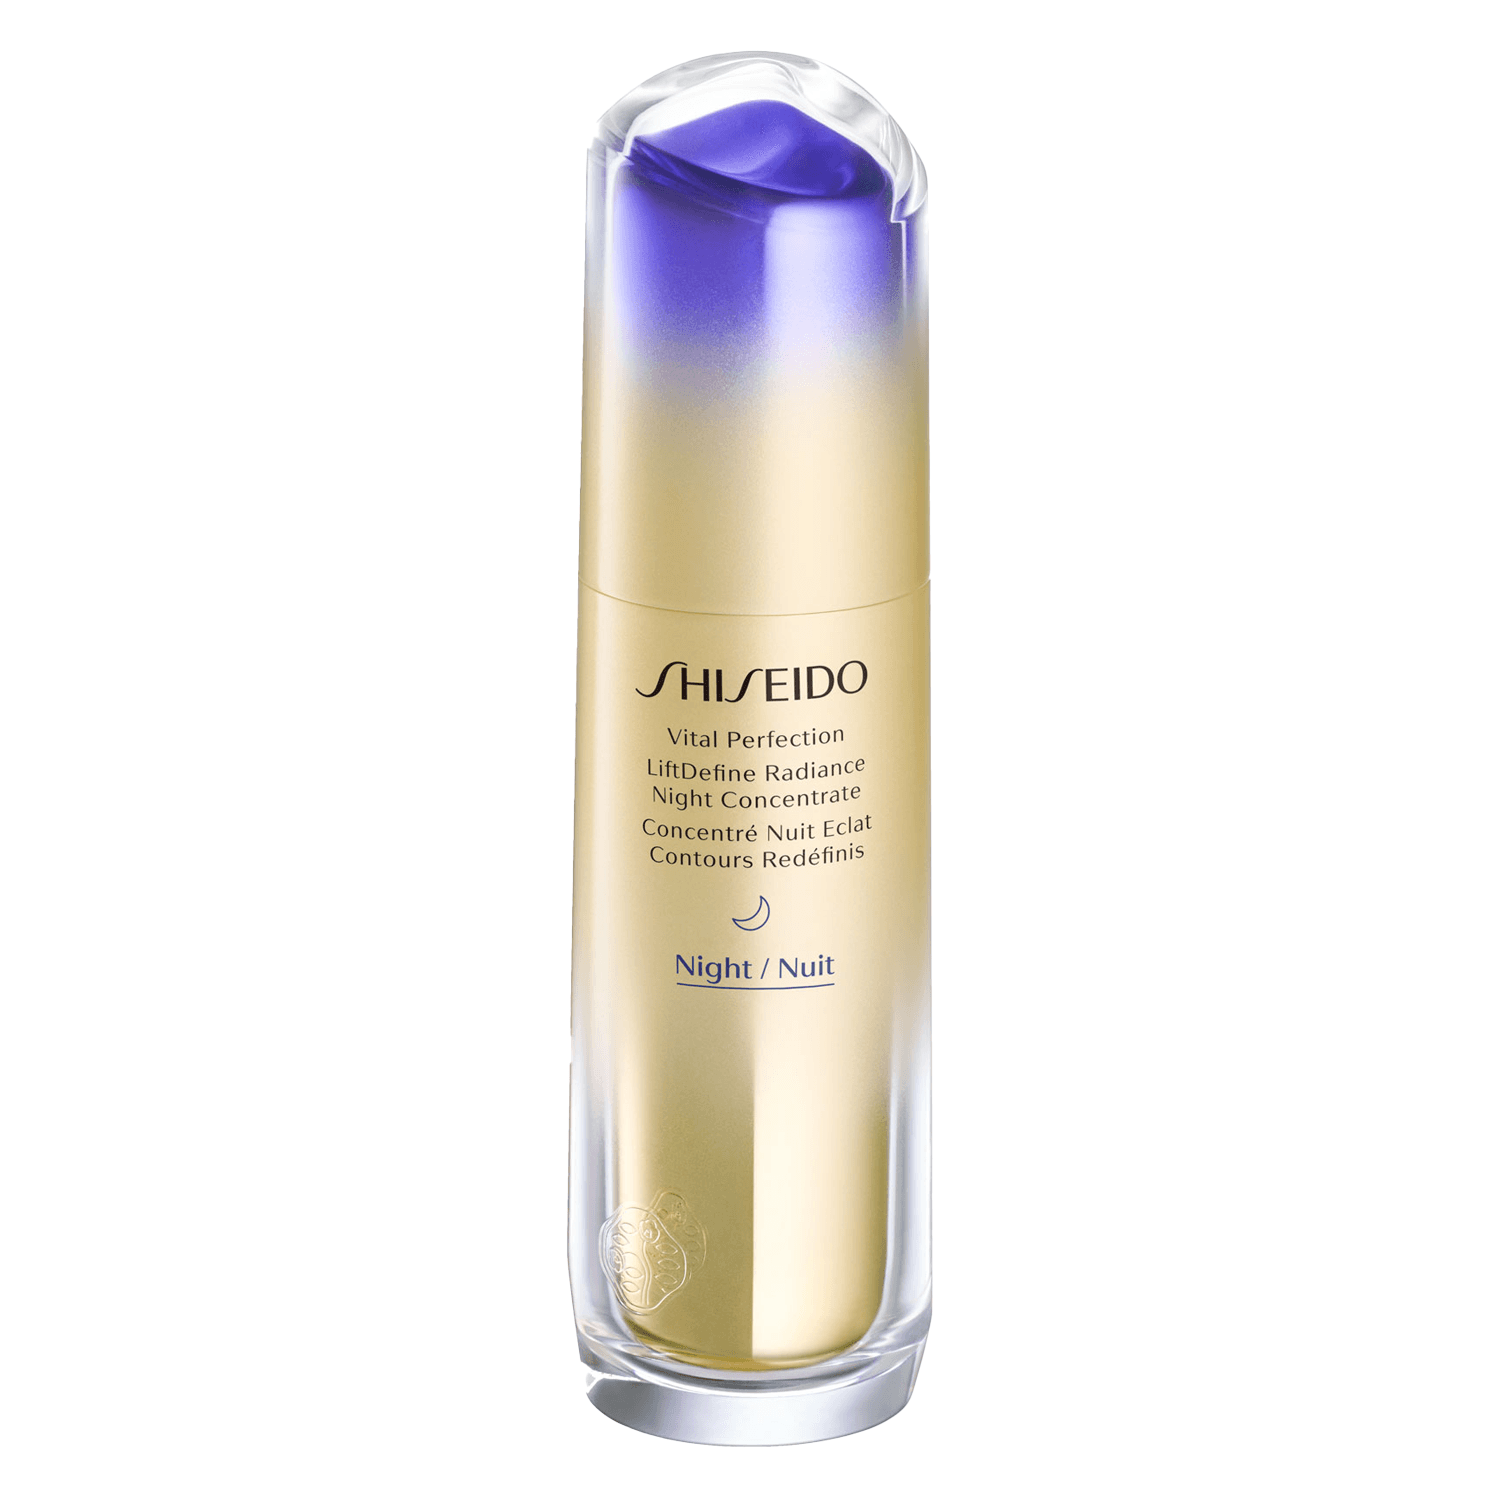 Vital Perfection - LiftDefine Radiance Night Concentrate